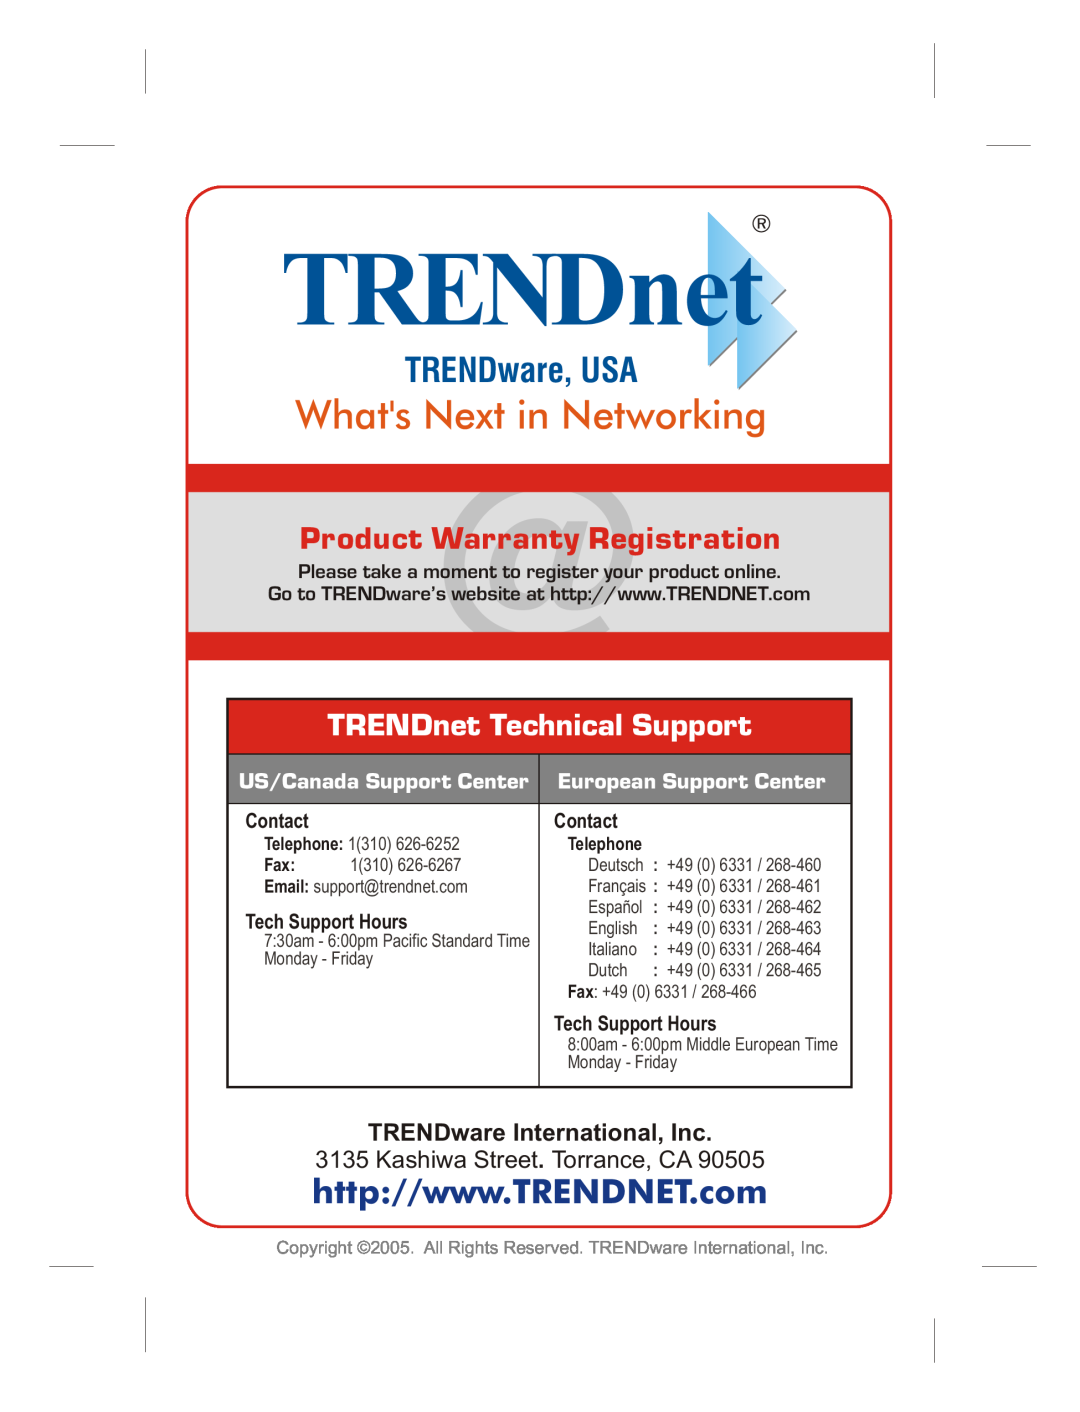 TRENDnet TK400K TRENDnet Technical Support, US/Canada Support Center, European Support Center, Whats Next in Networking 